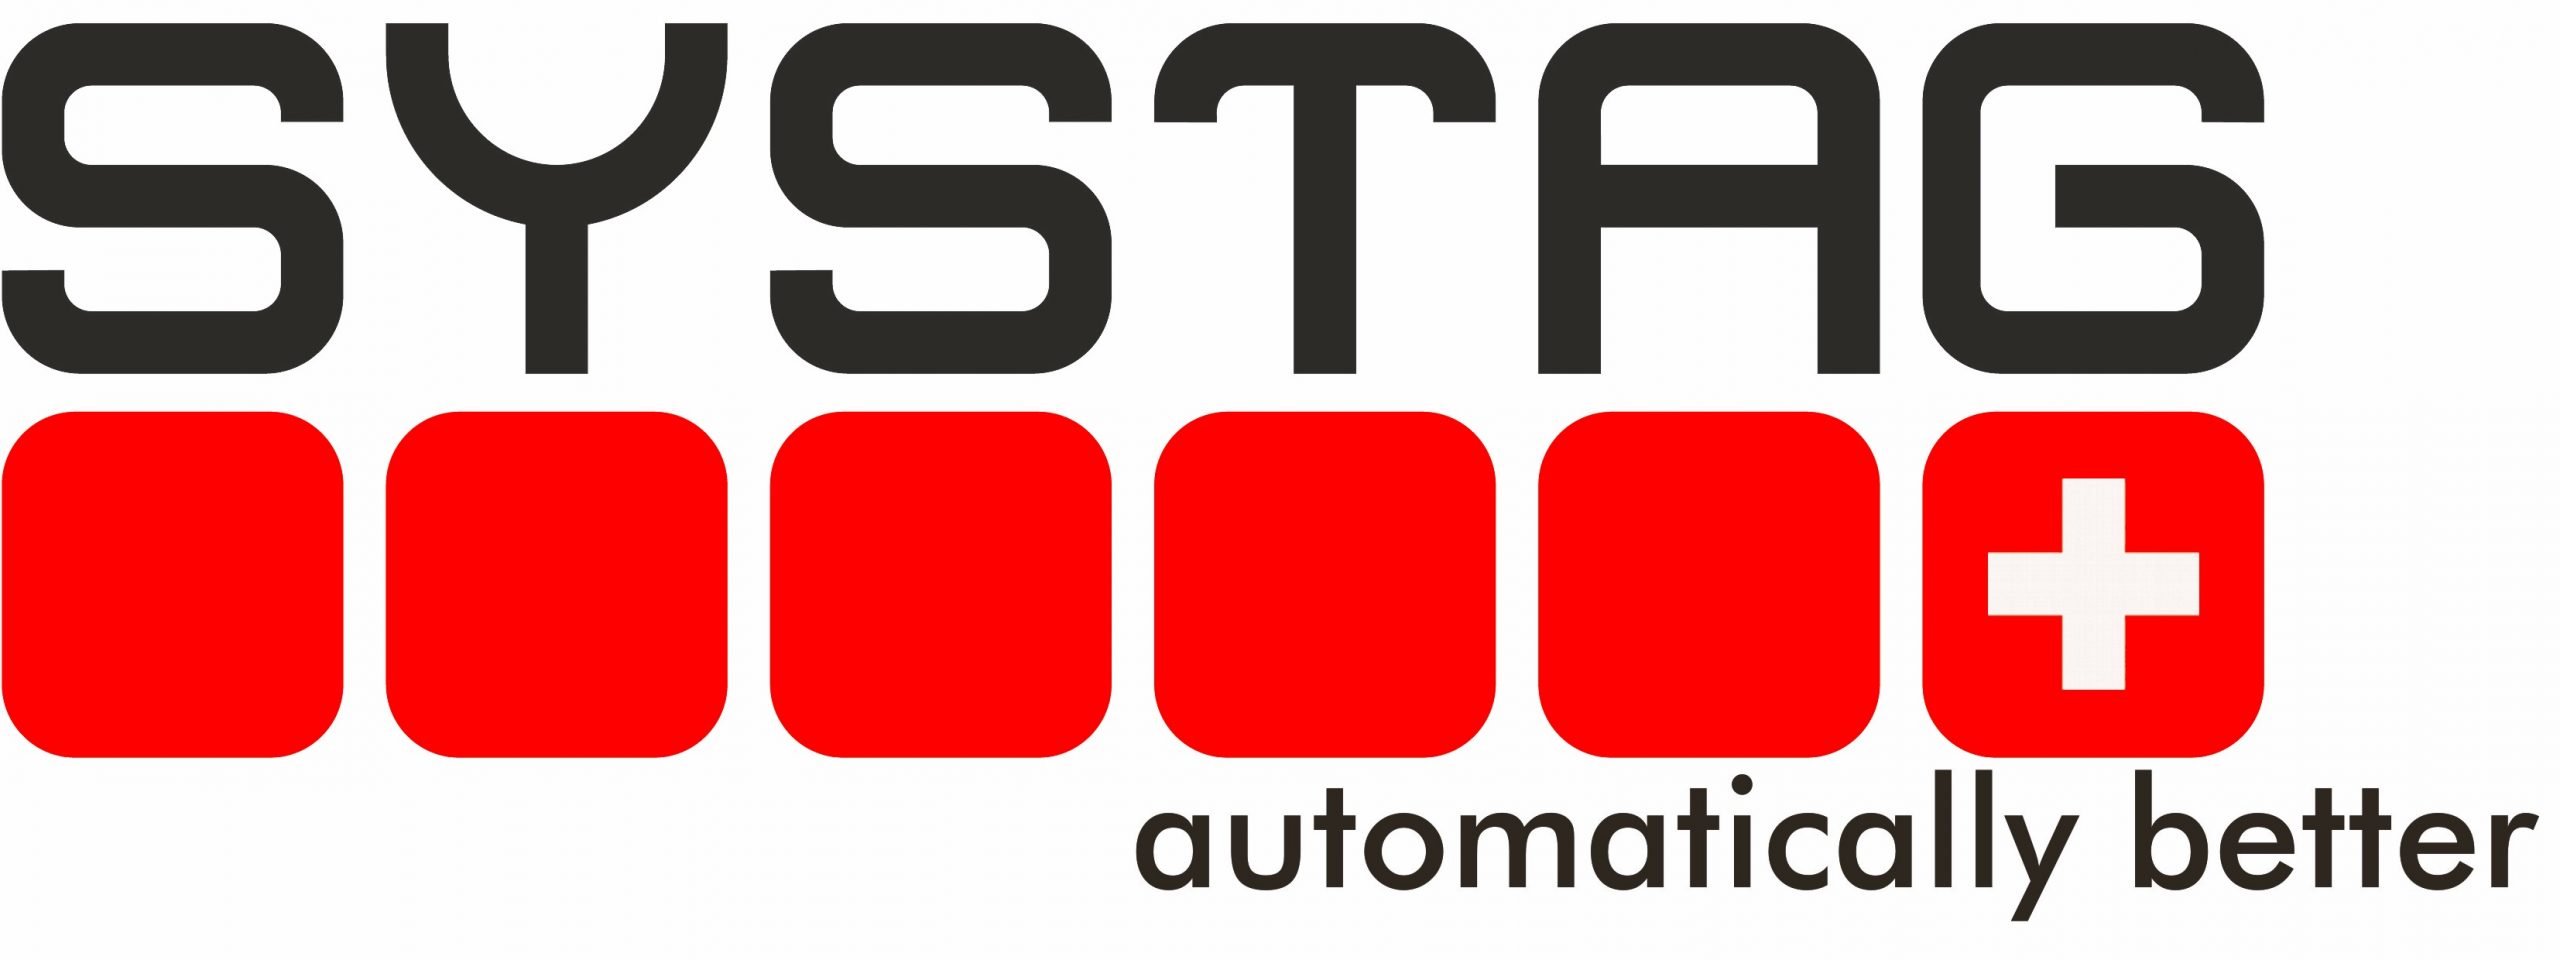 SYSTAG total laboratory automation solutions